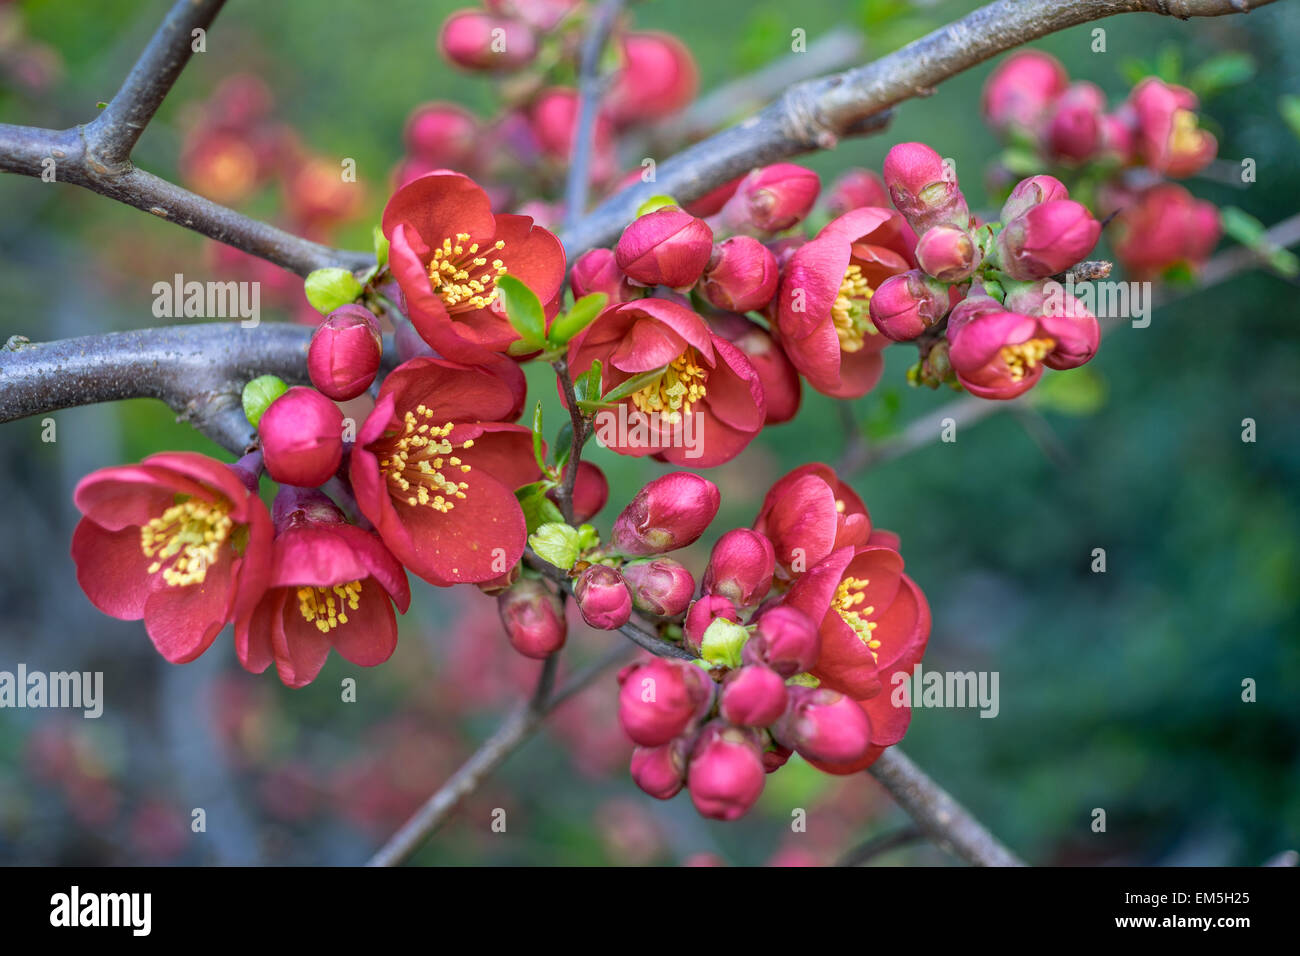 Japanese quince red blossom Chaenomeles superba Stock Photo